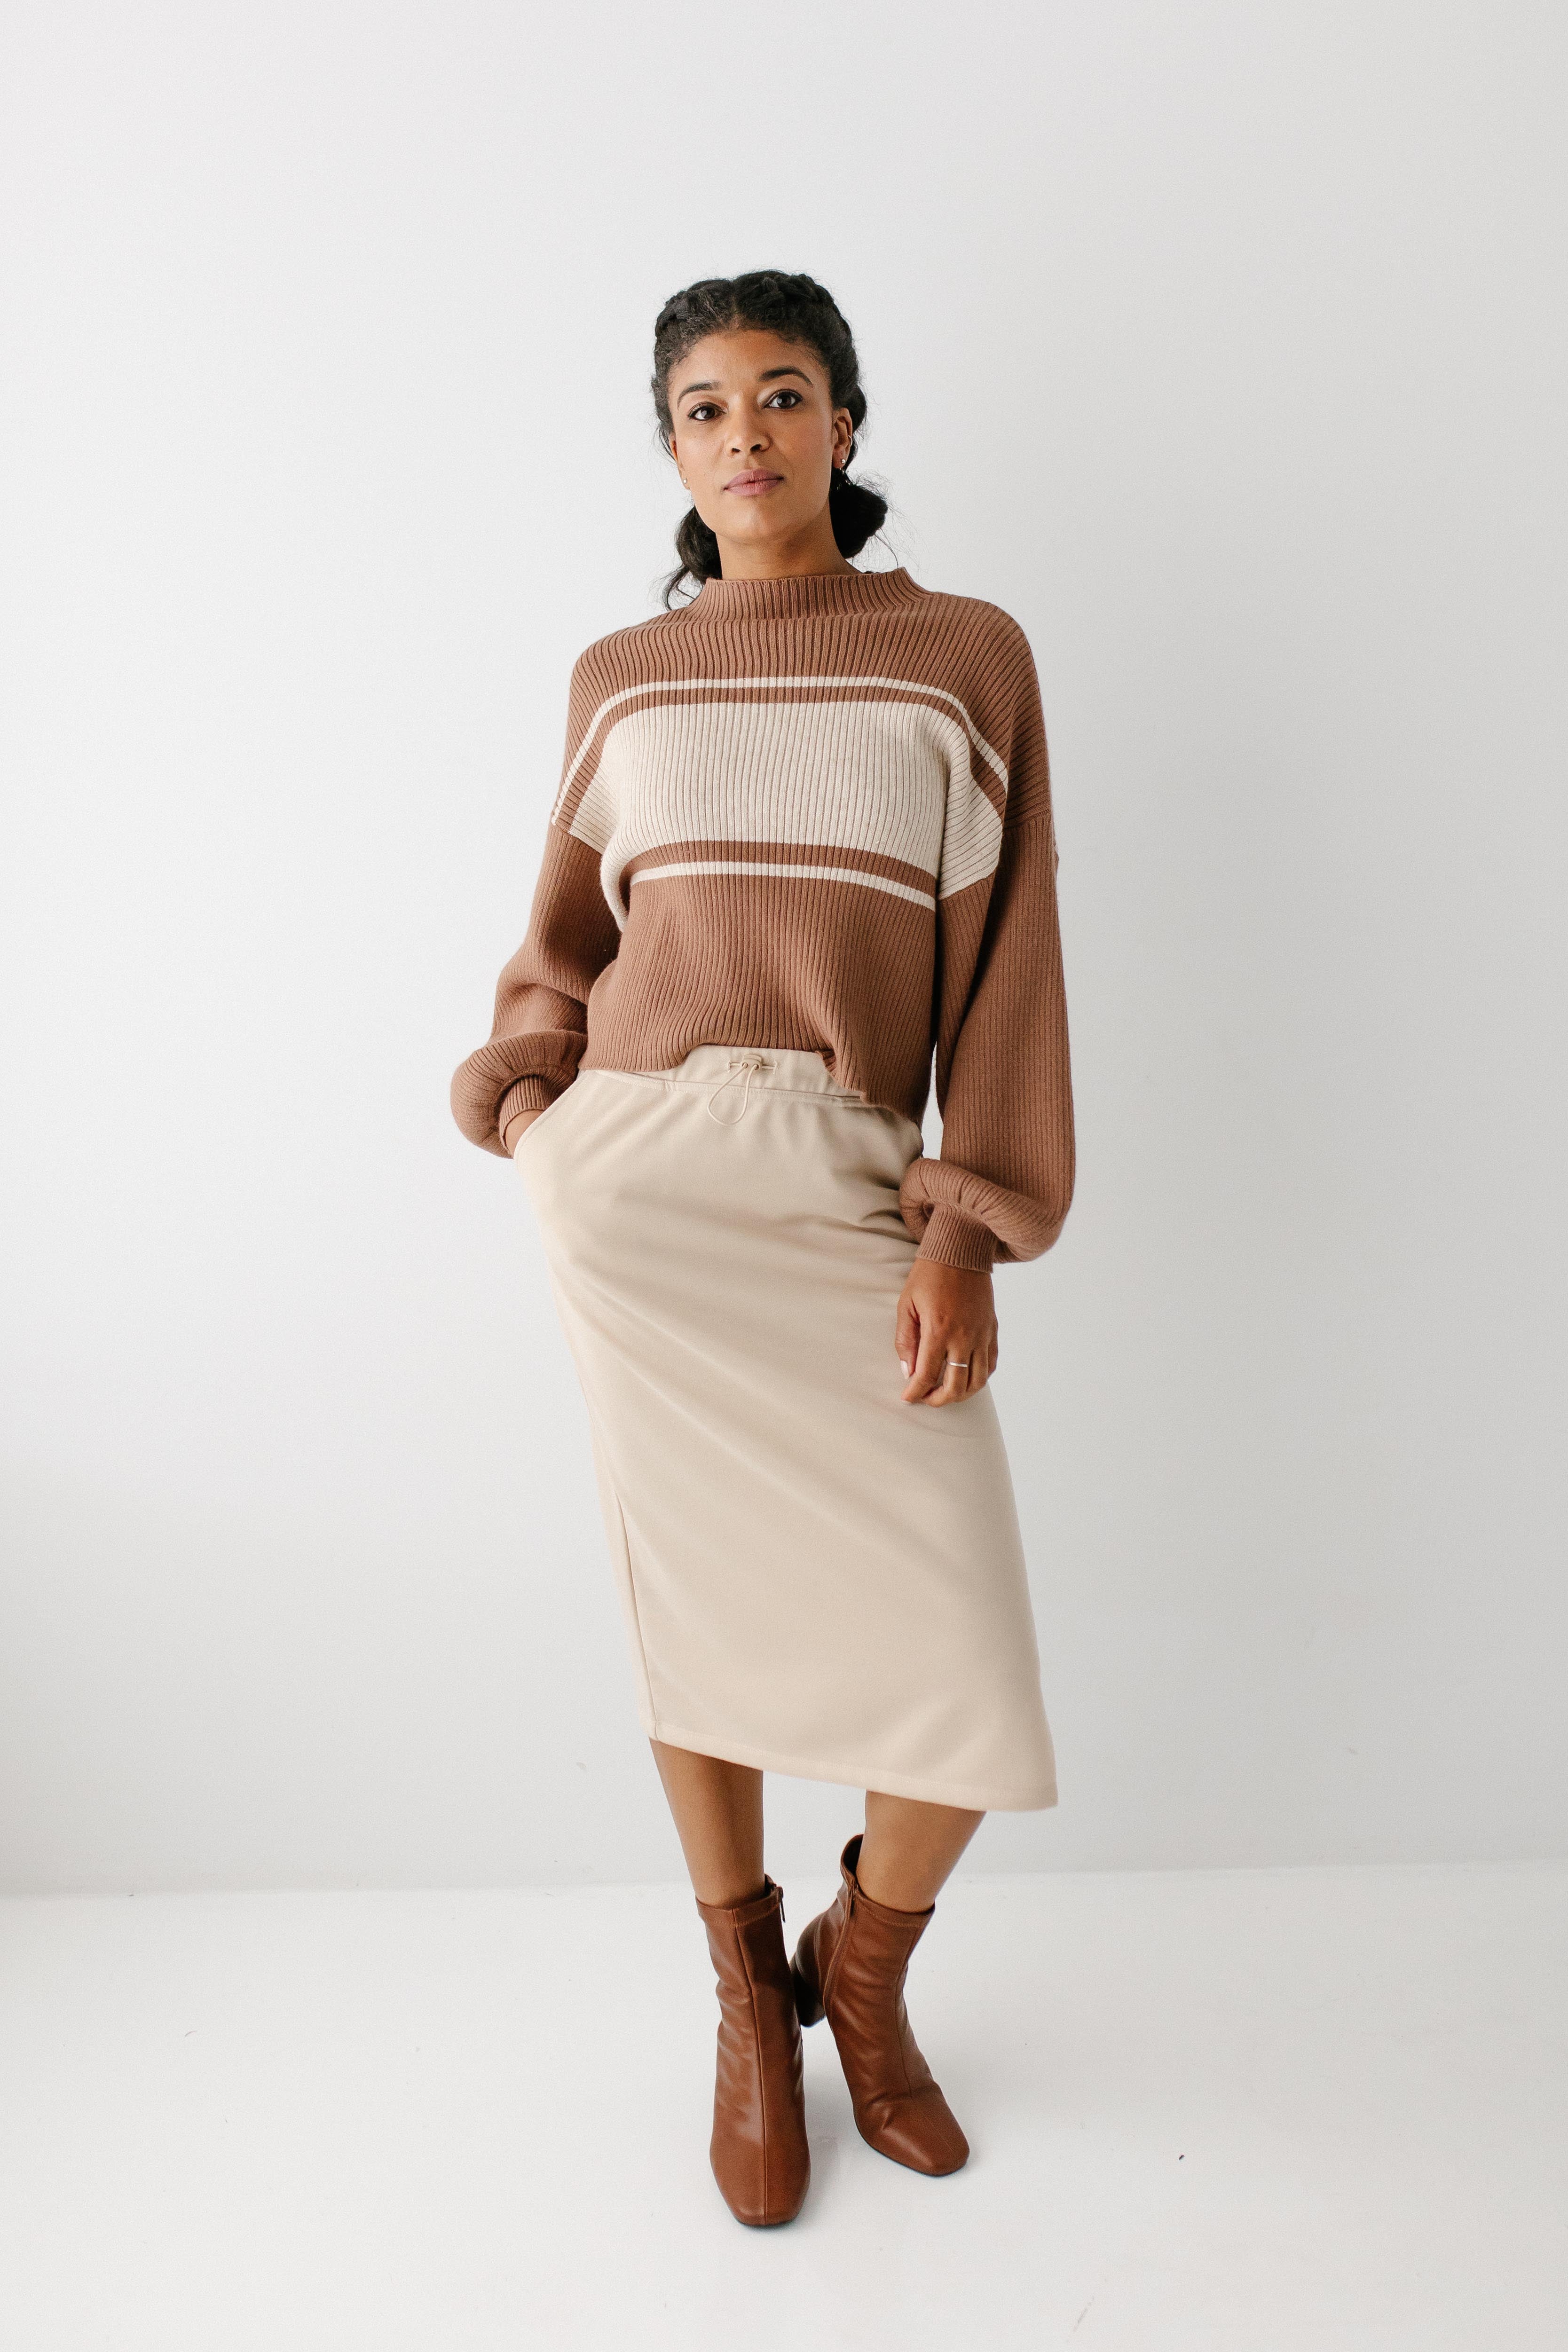 Modest Skirts | Modest Skirt Outfits | The Main Street Exchange